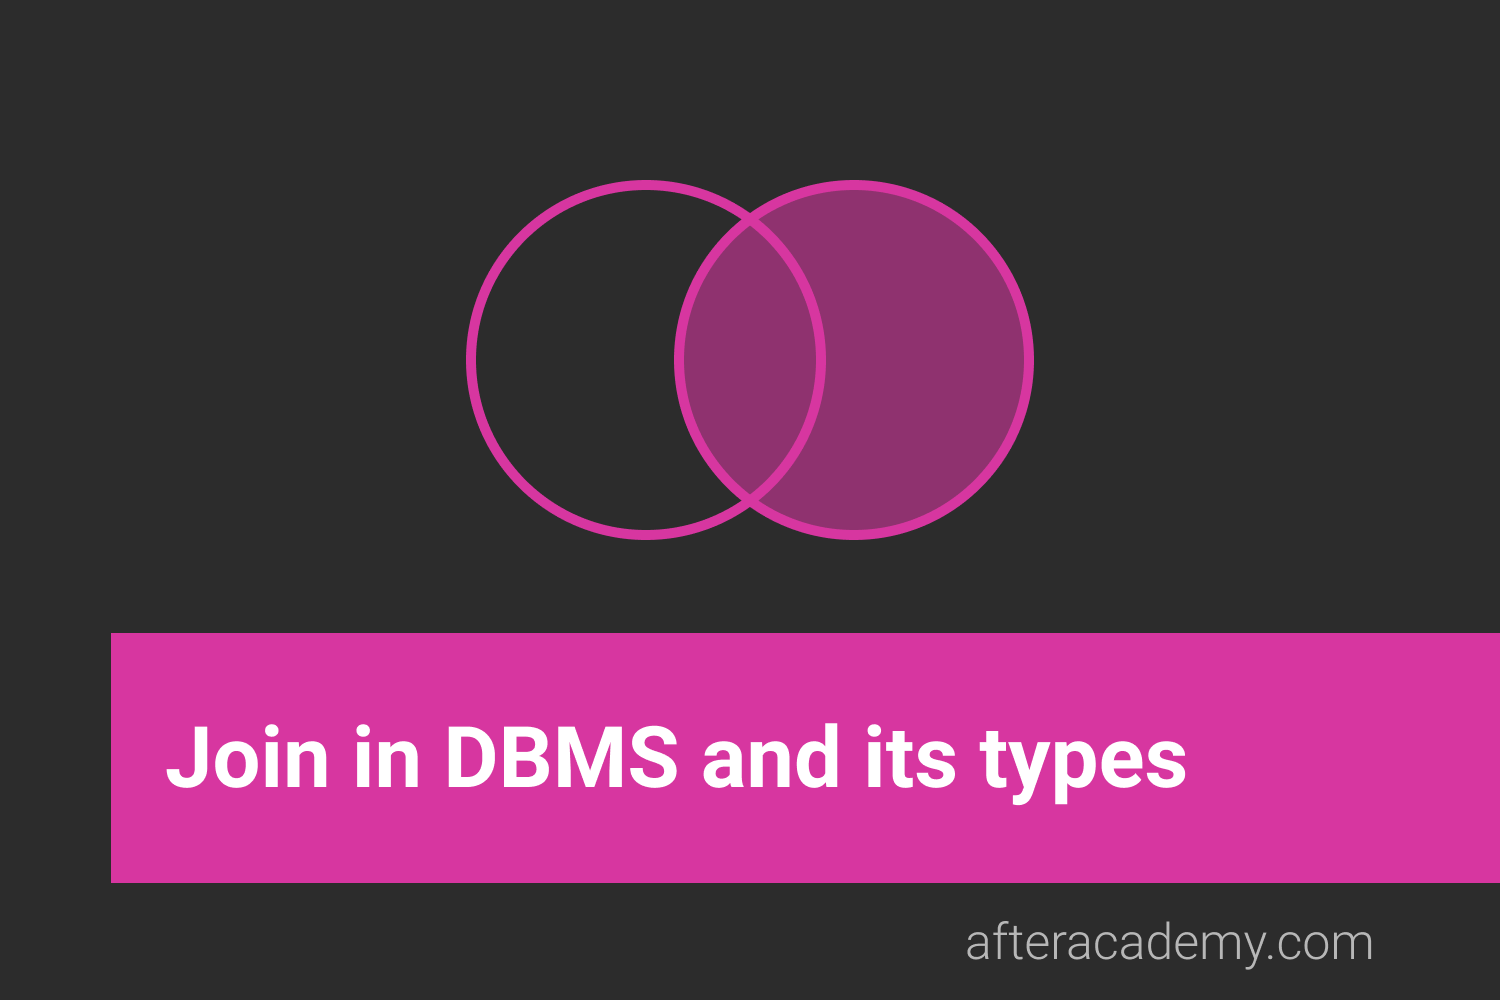 What is Join in DBMS and what are its types?